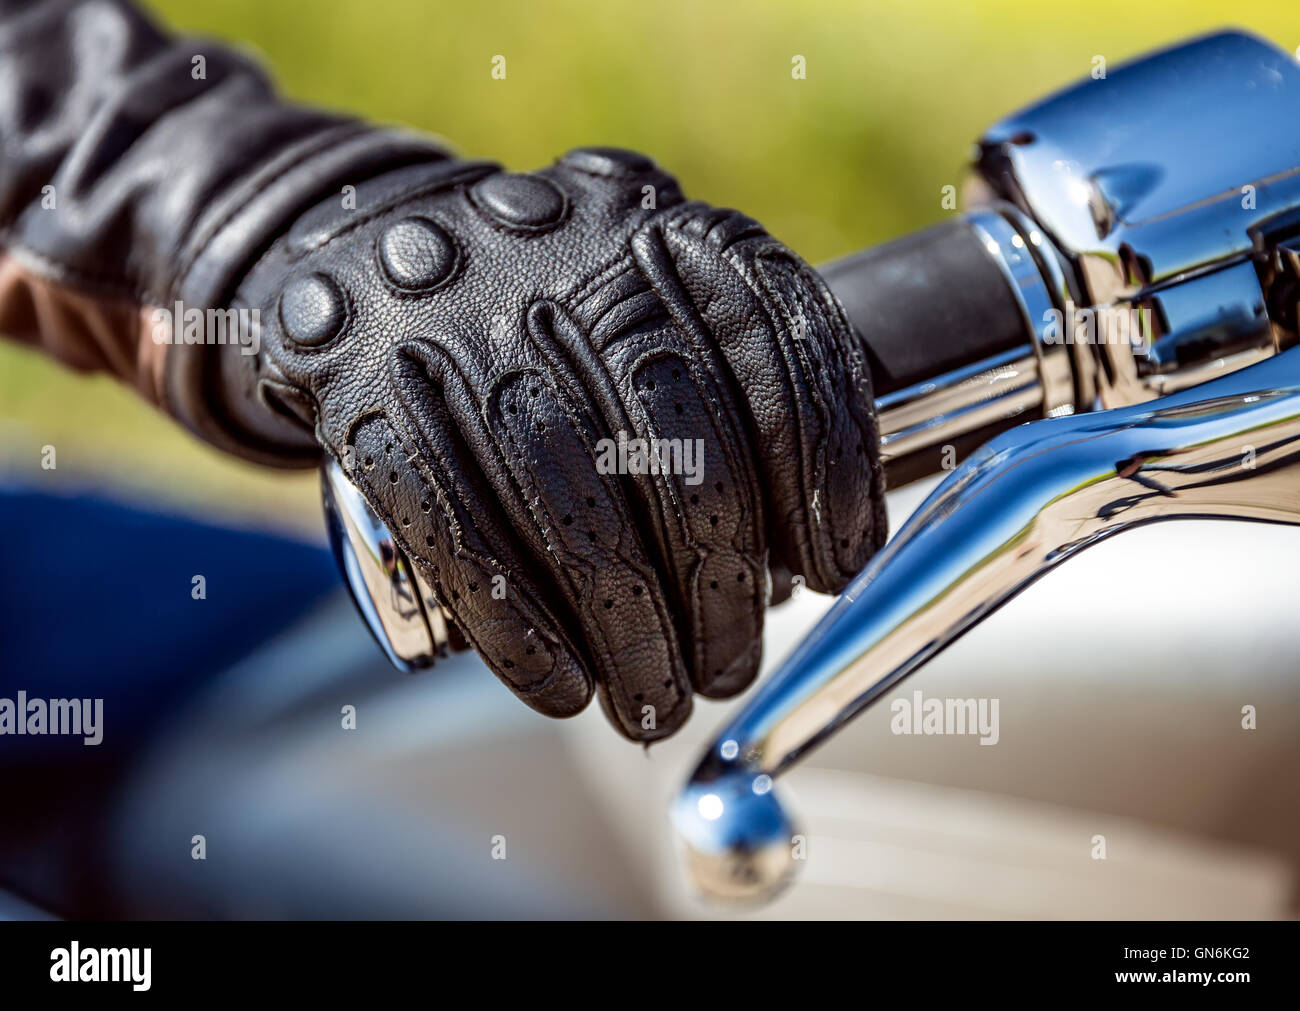 Human hand in a Motorcycle Racing Gloves holds a motorcycle throttle control. Hand protection from falls and accidents. Stock Photo